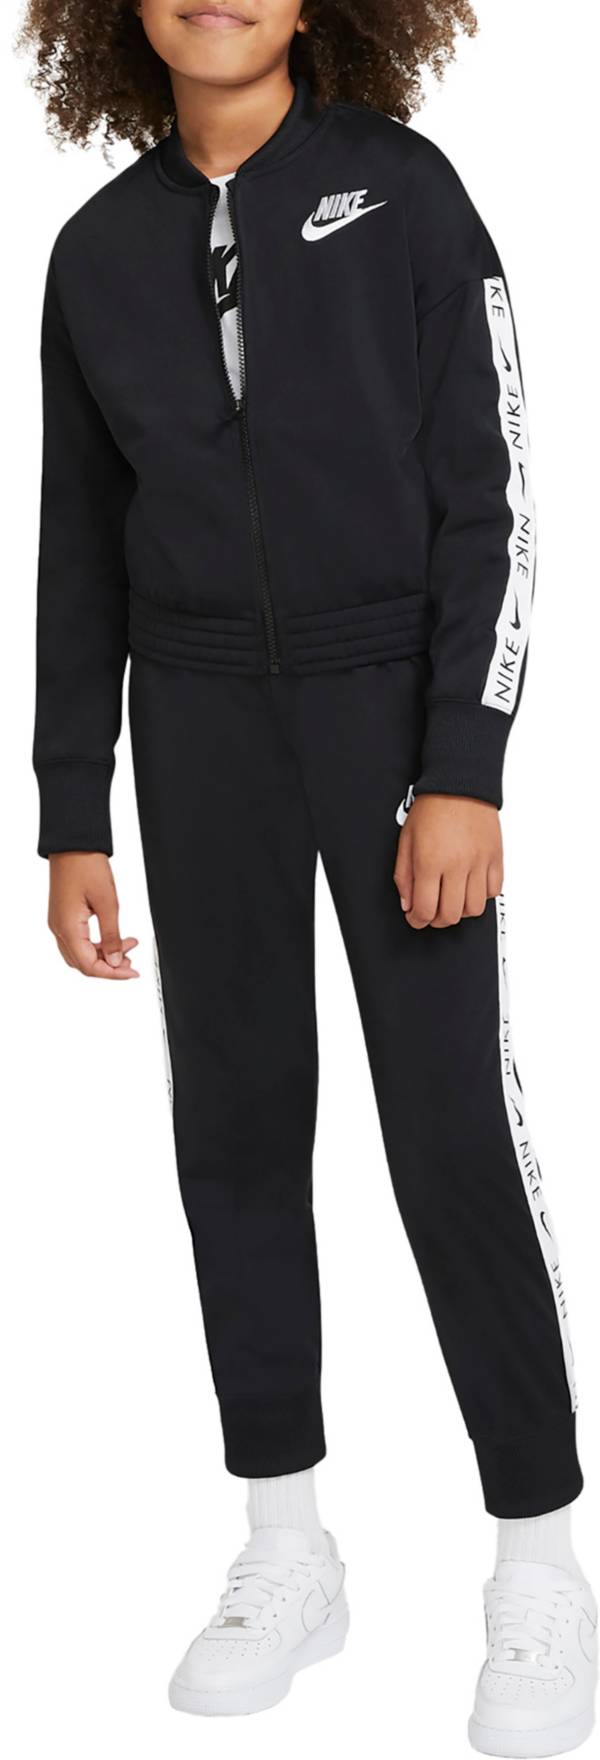 Girls' Sportswear Full-Zip and Tracksuit | Dick's Sporting Goods